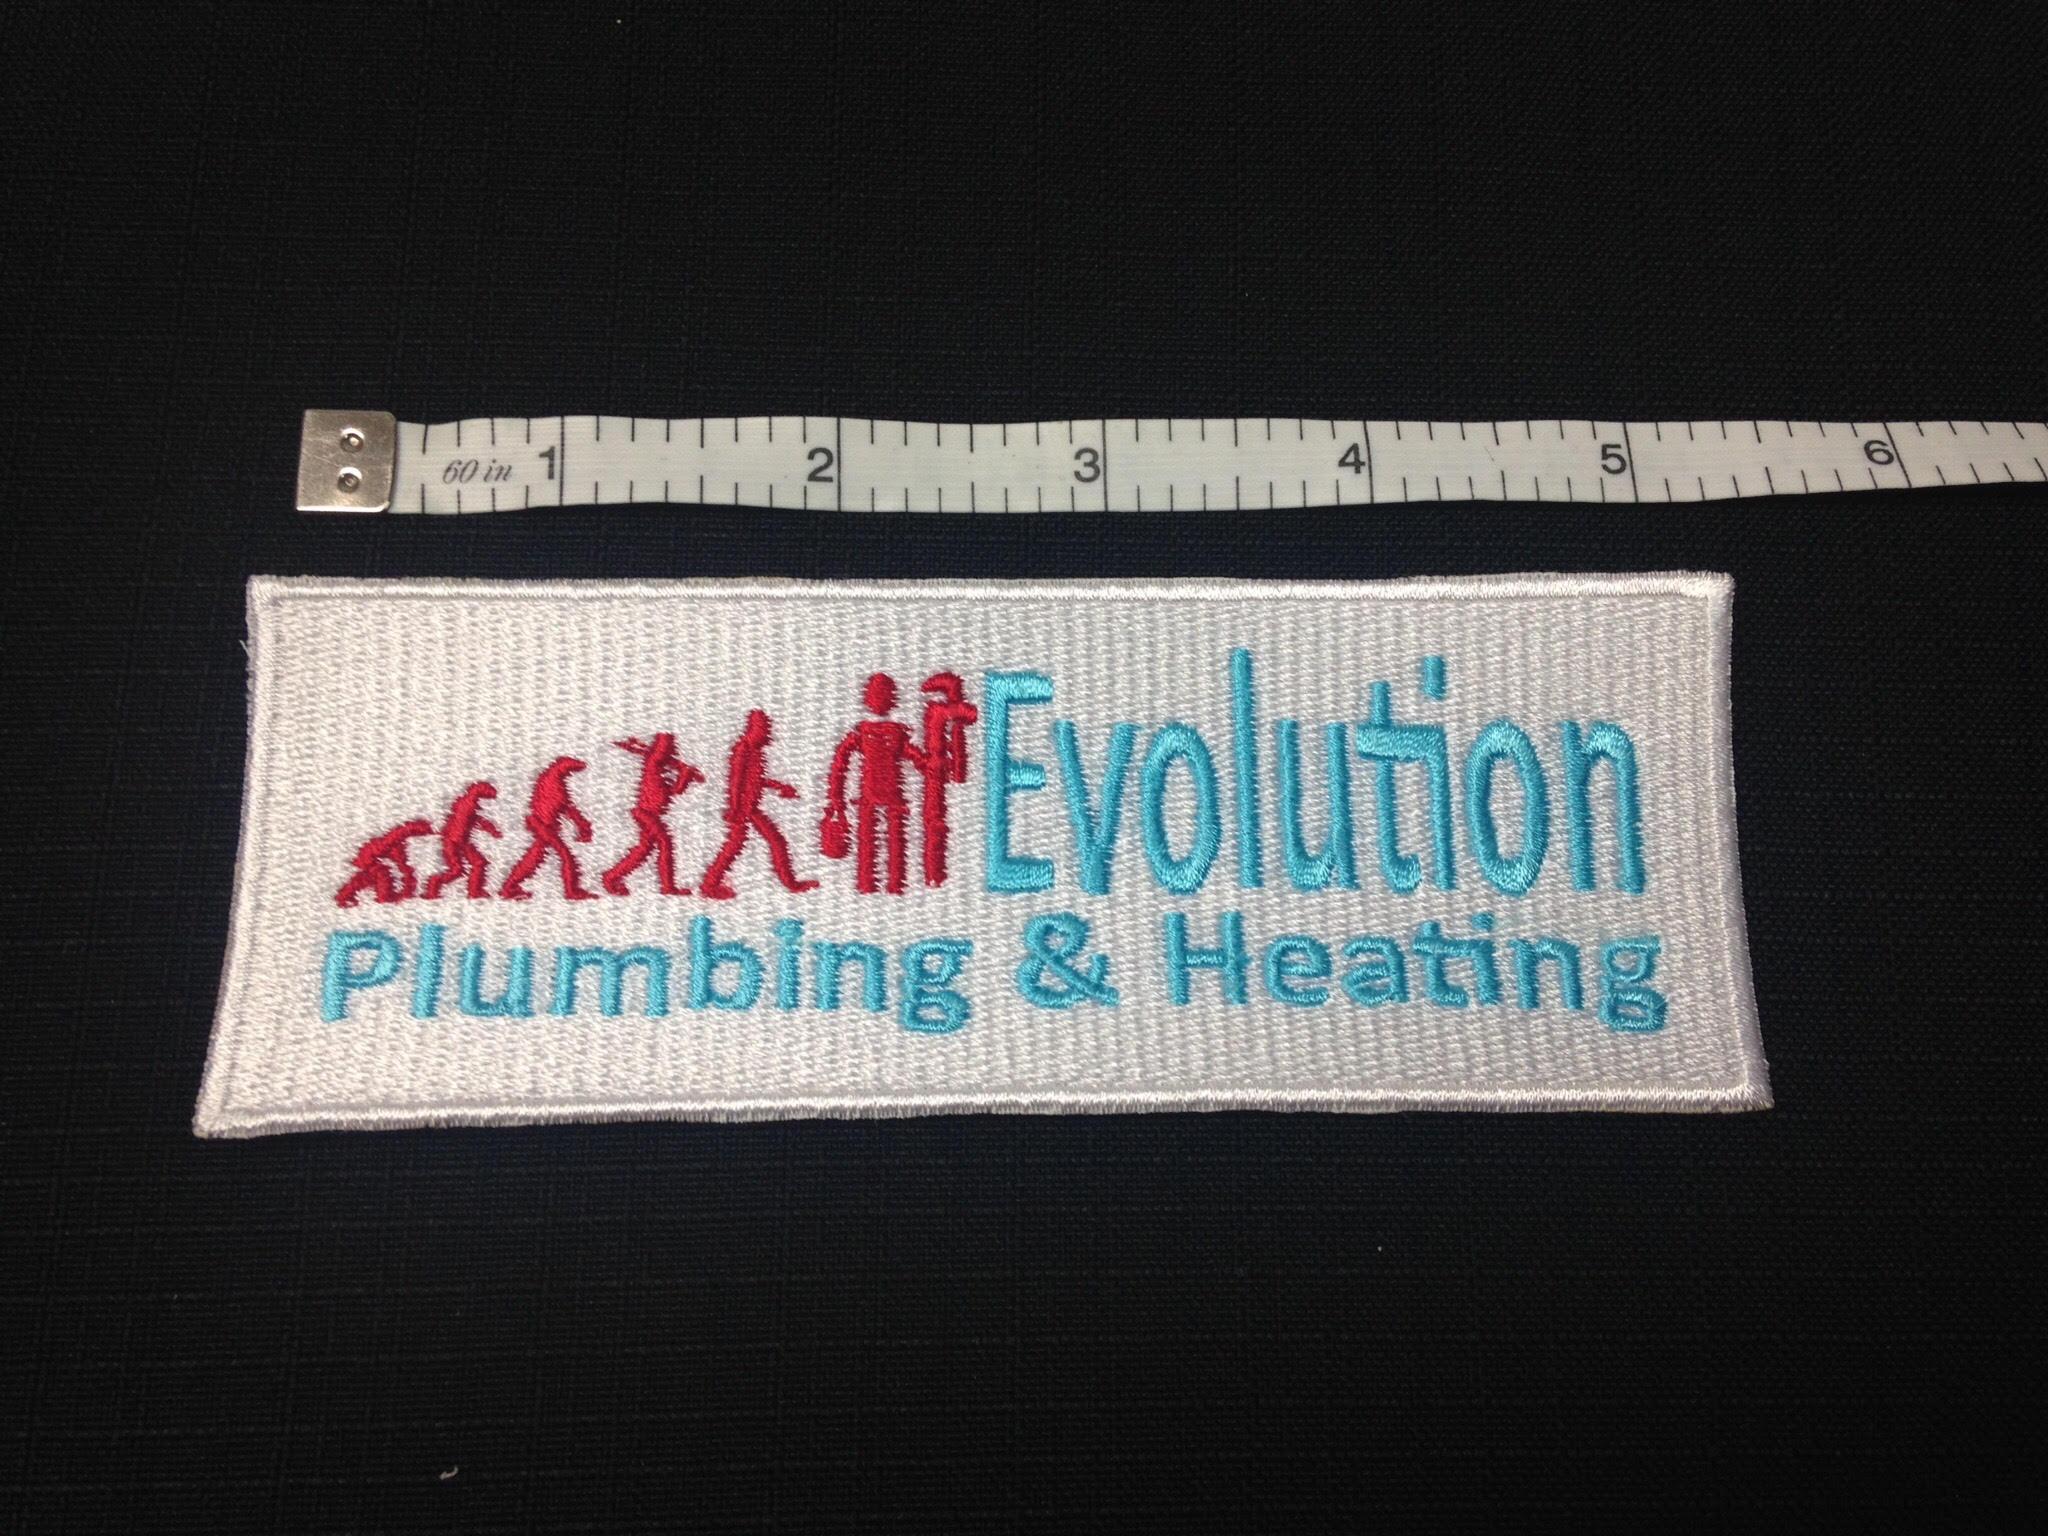 Evolution Plumbing and heating logo embroidery design